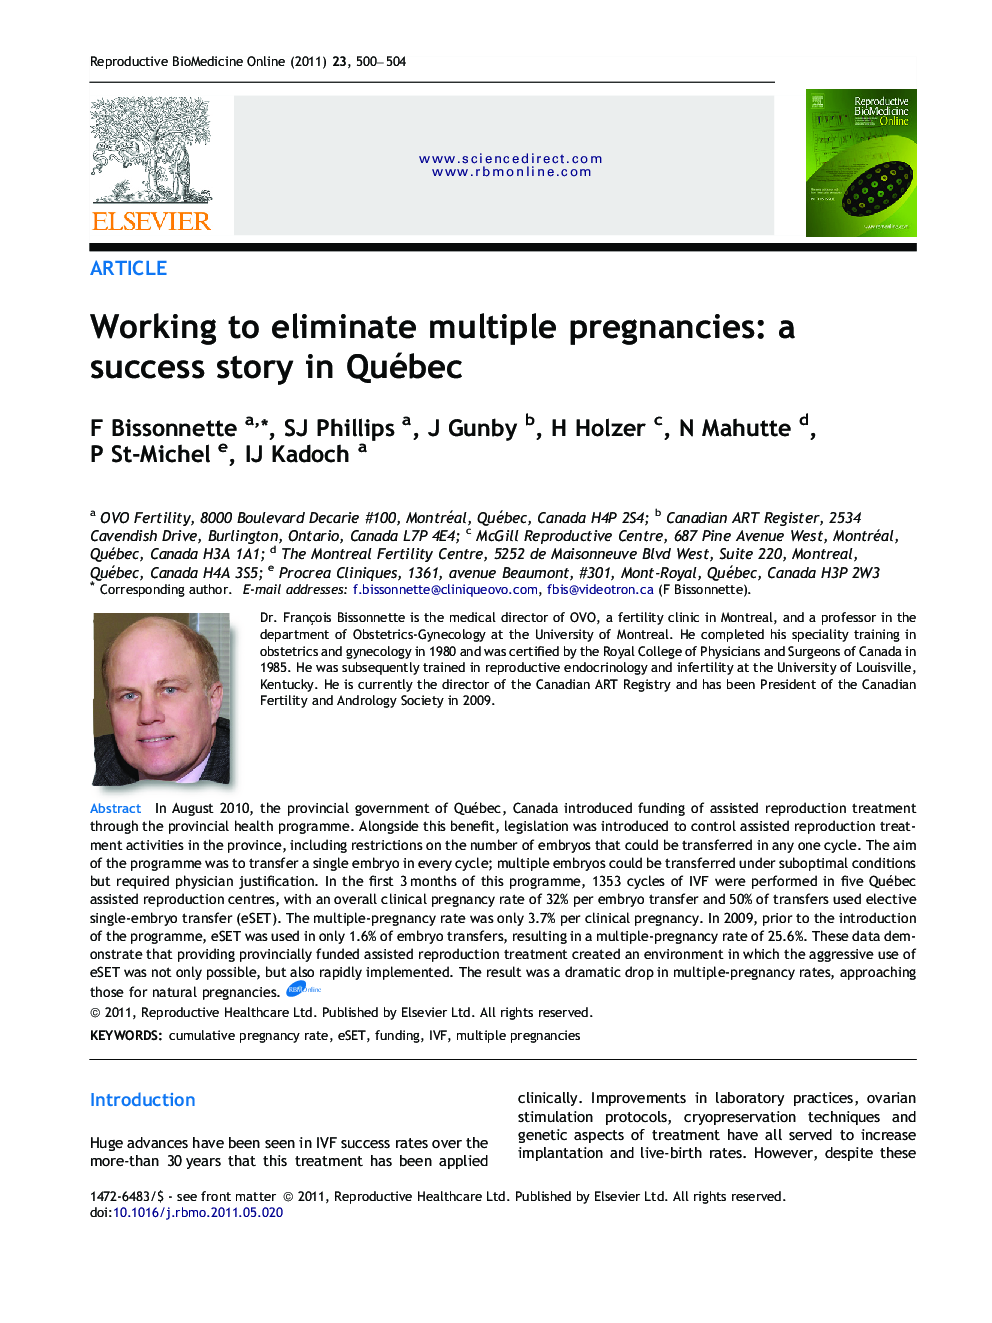 Working to eliminate multiple pregnancies: a success story in Québec 